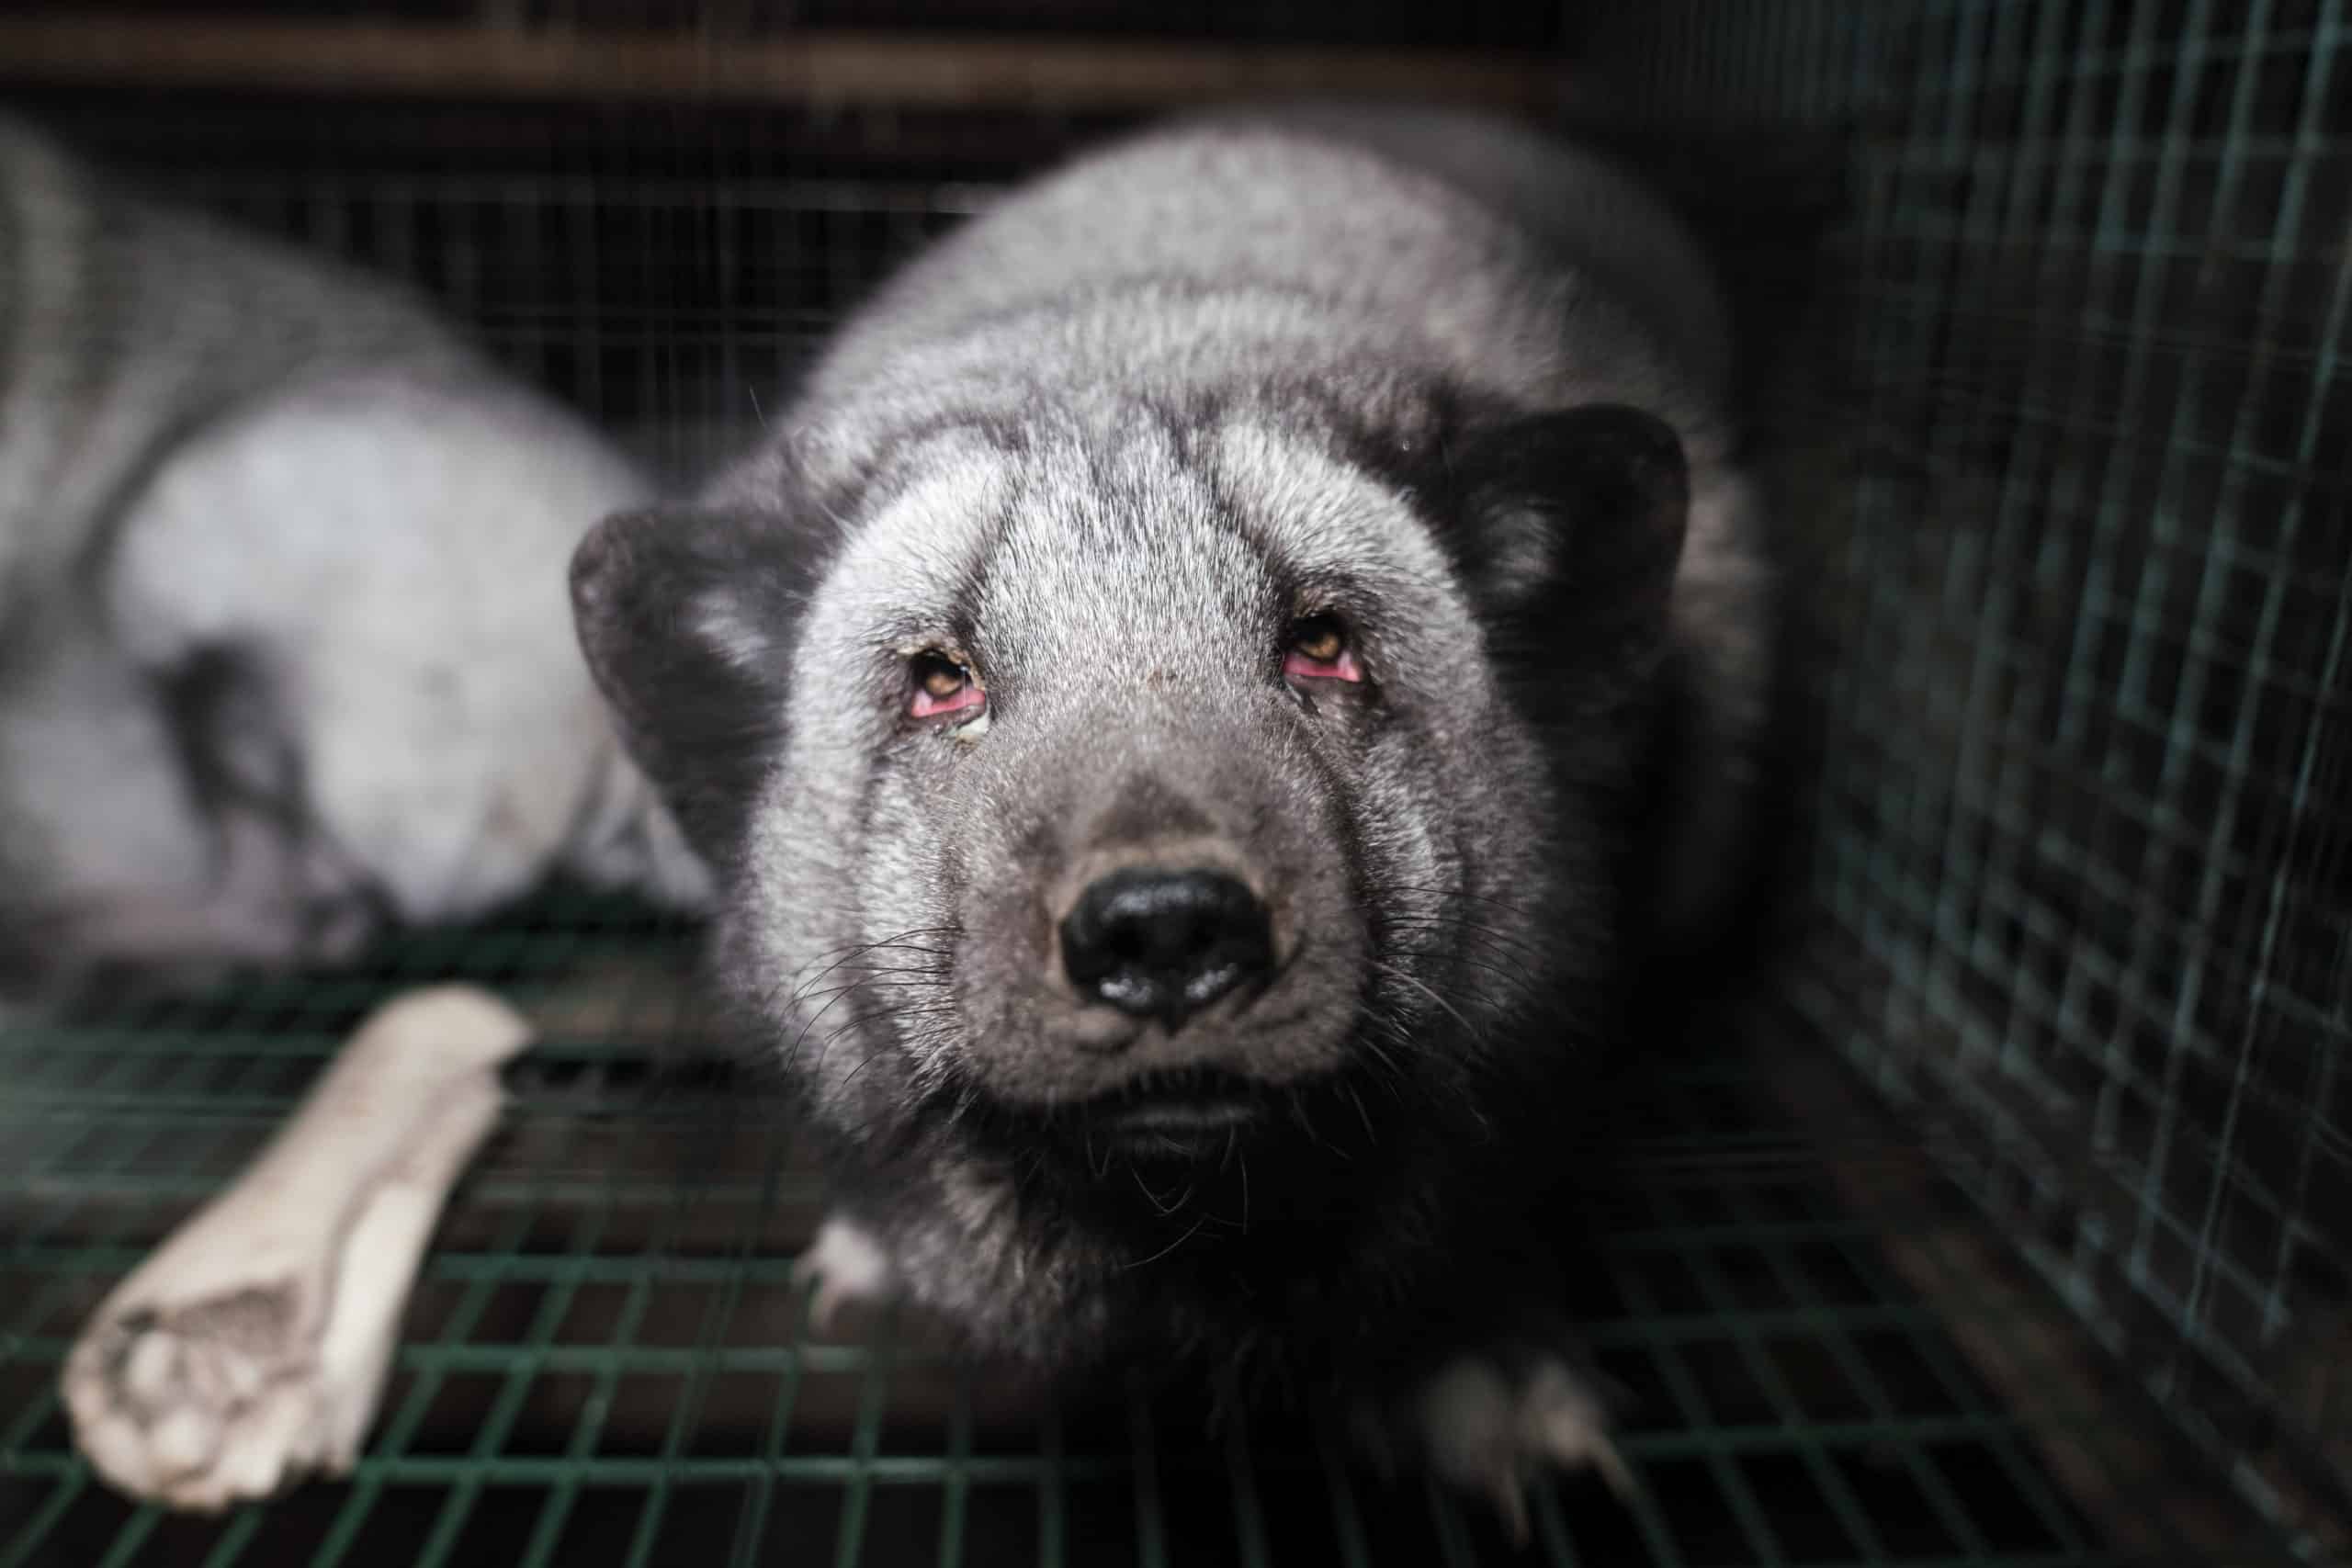 For this season’s most fashionable accessory, download the 2022 Fur Free Guide